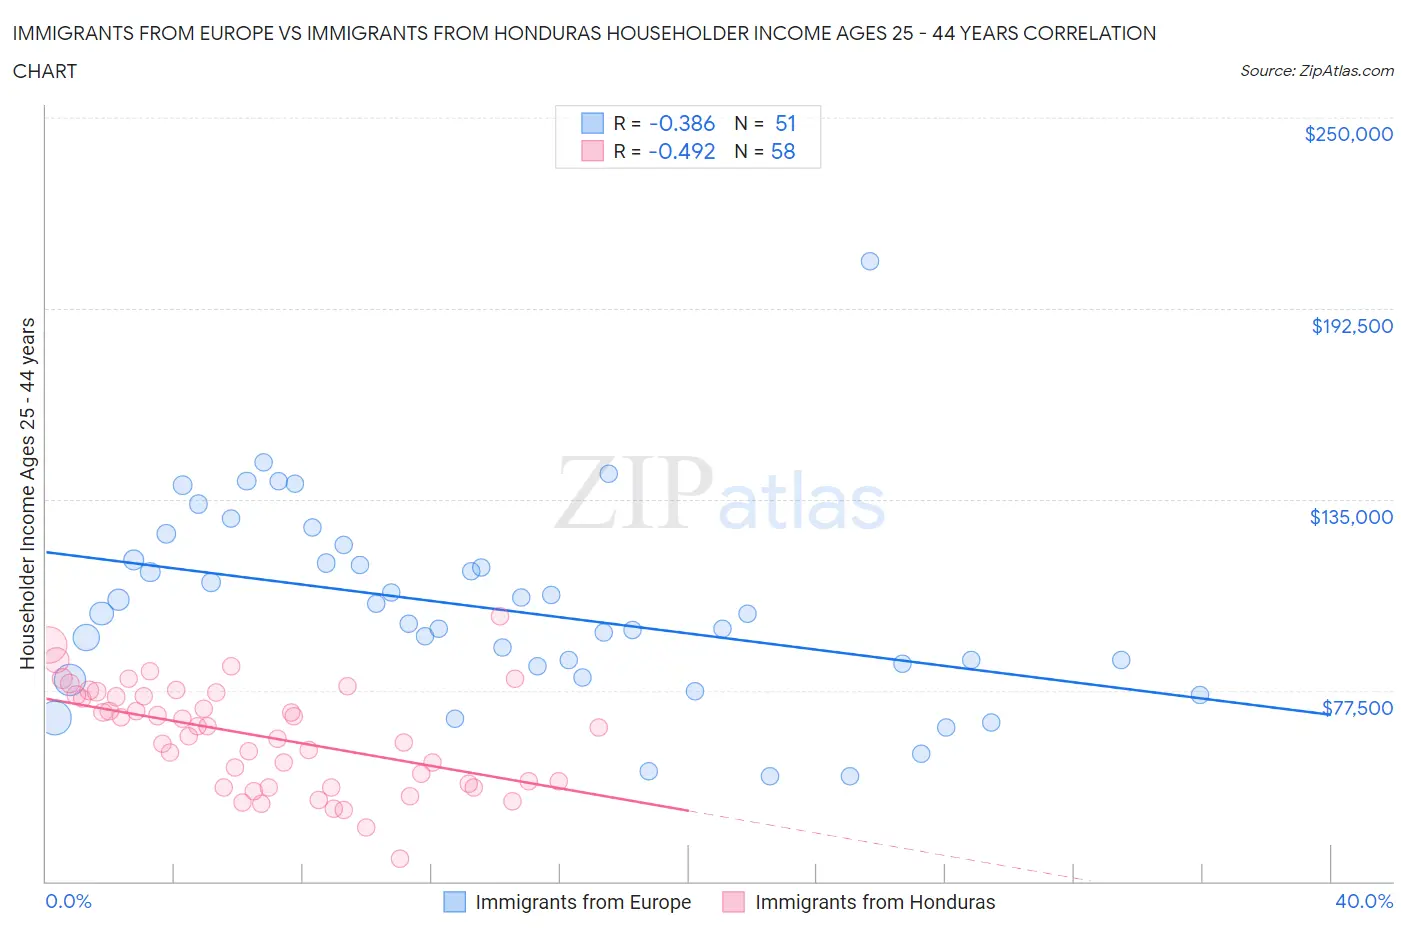 Immigrants from Europe vs Immigrants from Honduras Householder Income Ages 25 - 44 years